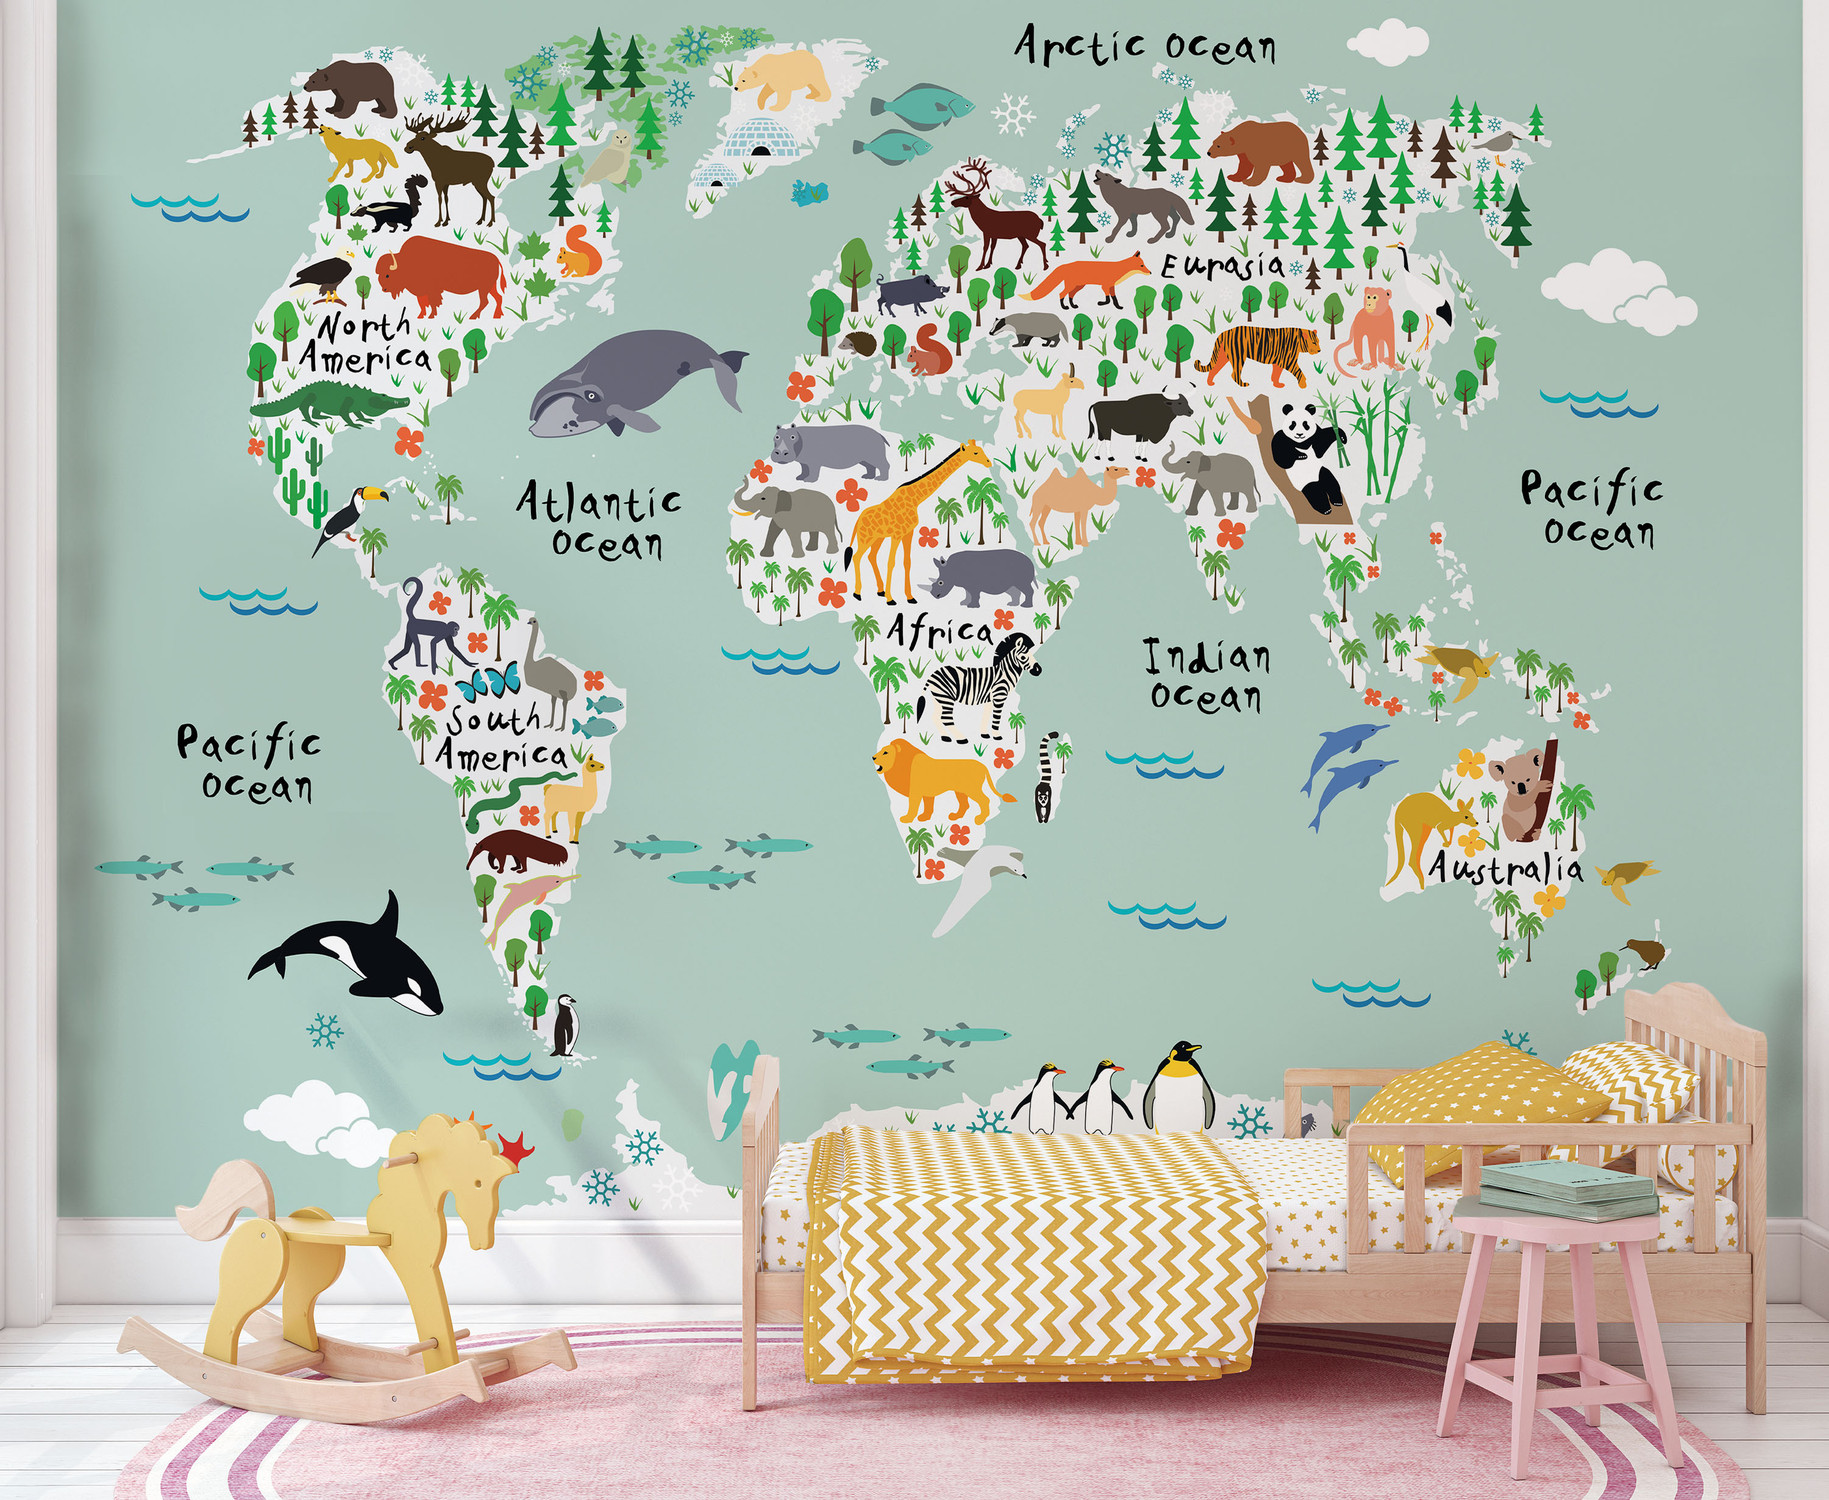 Kids Illustrated Animals of the World Map Mural - Seafoam Green Oceans in Room